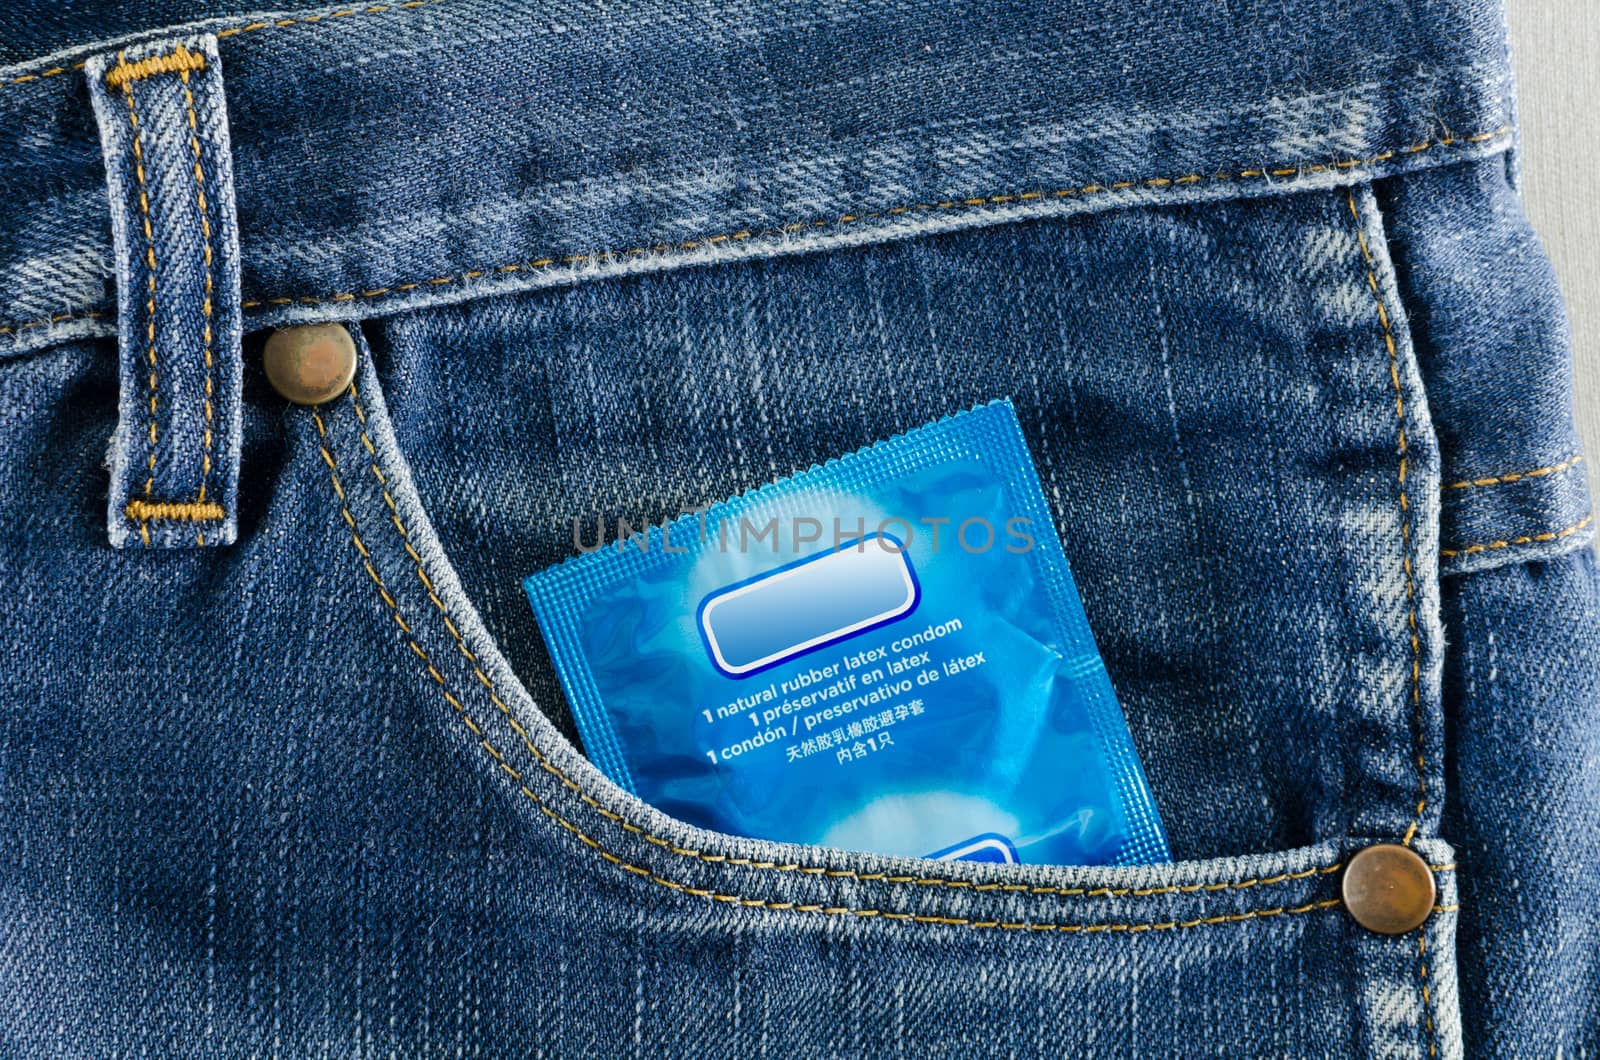 condom in the pocket of a blue jeans by nop16